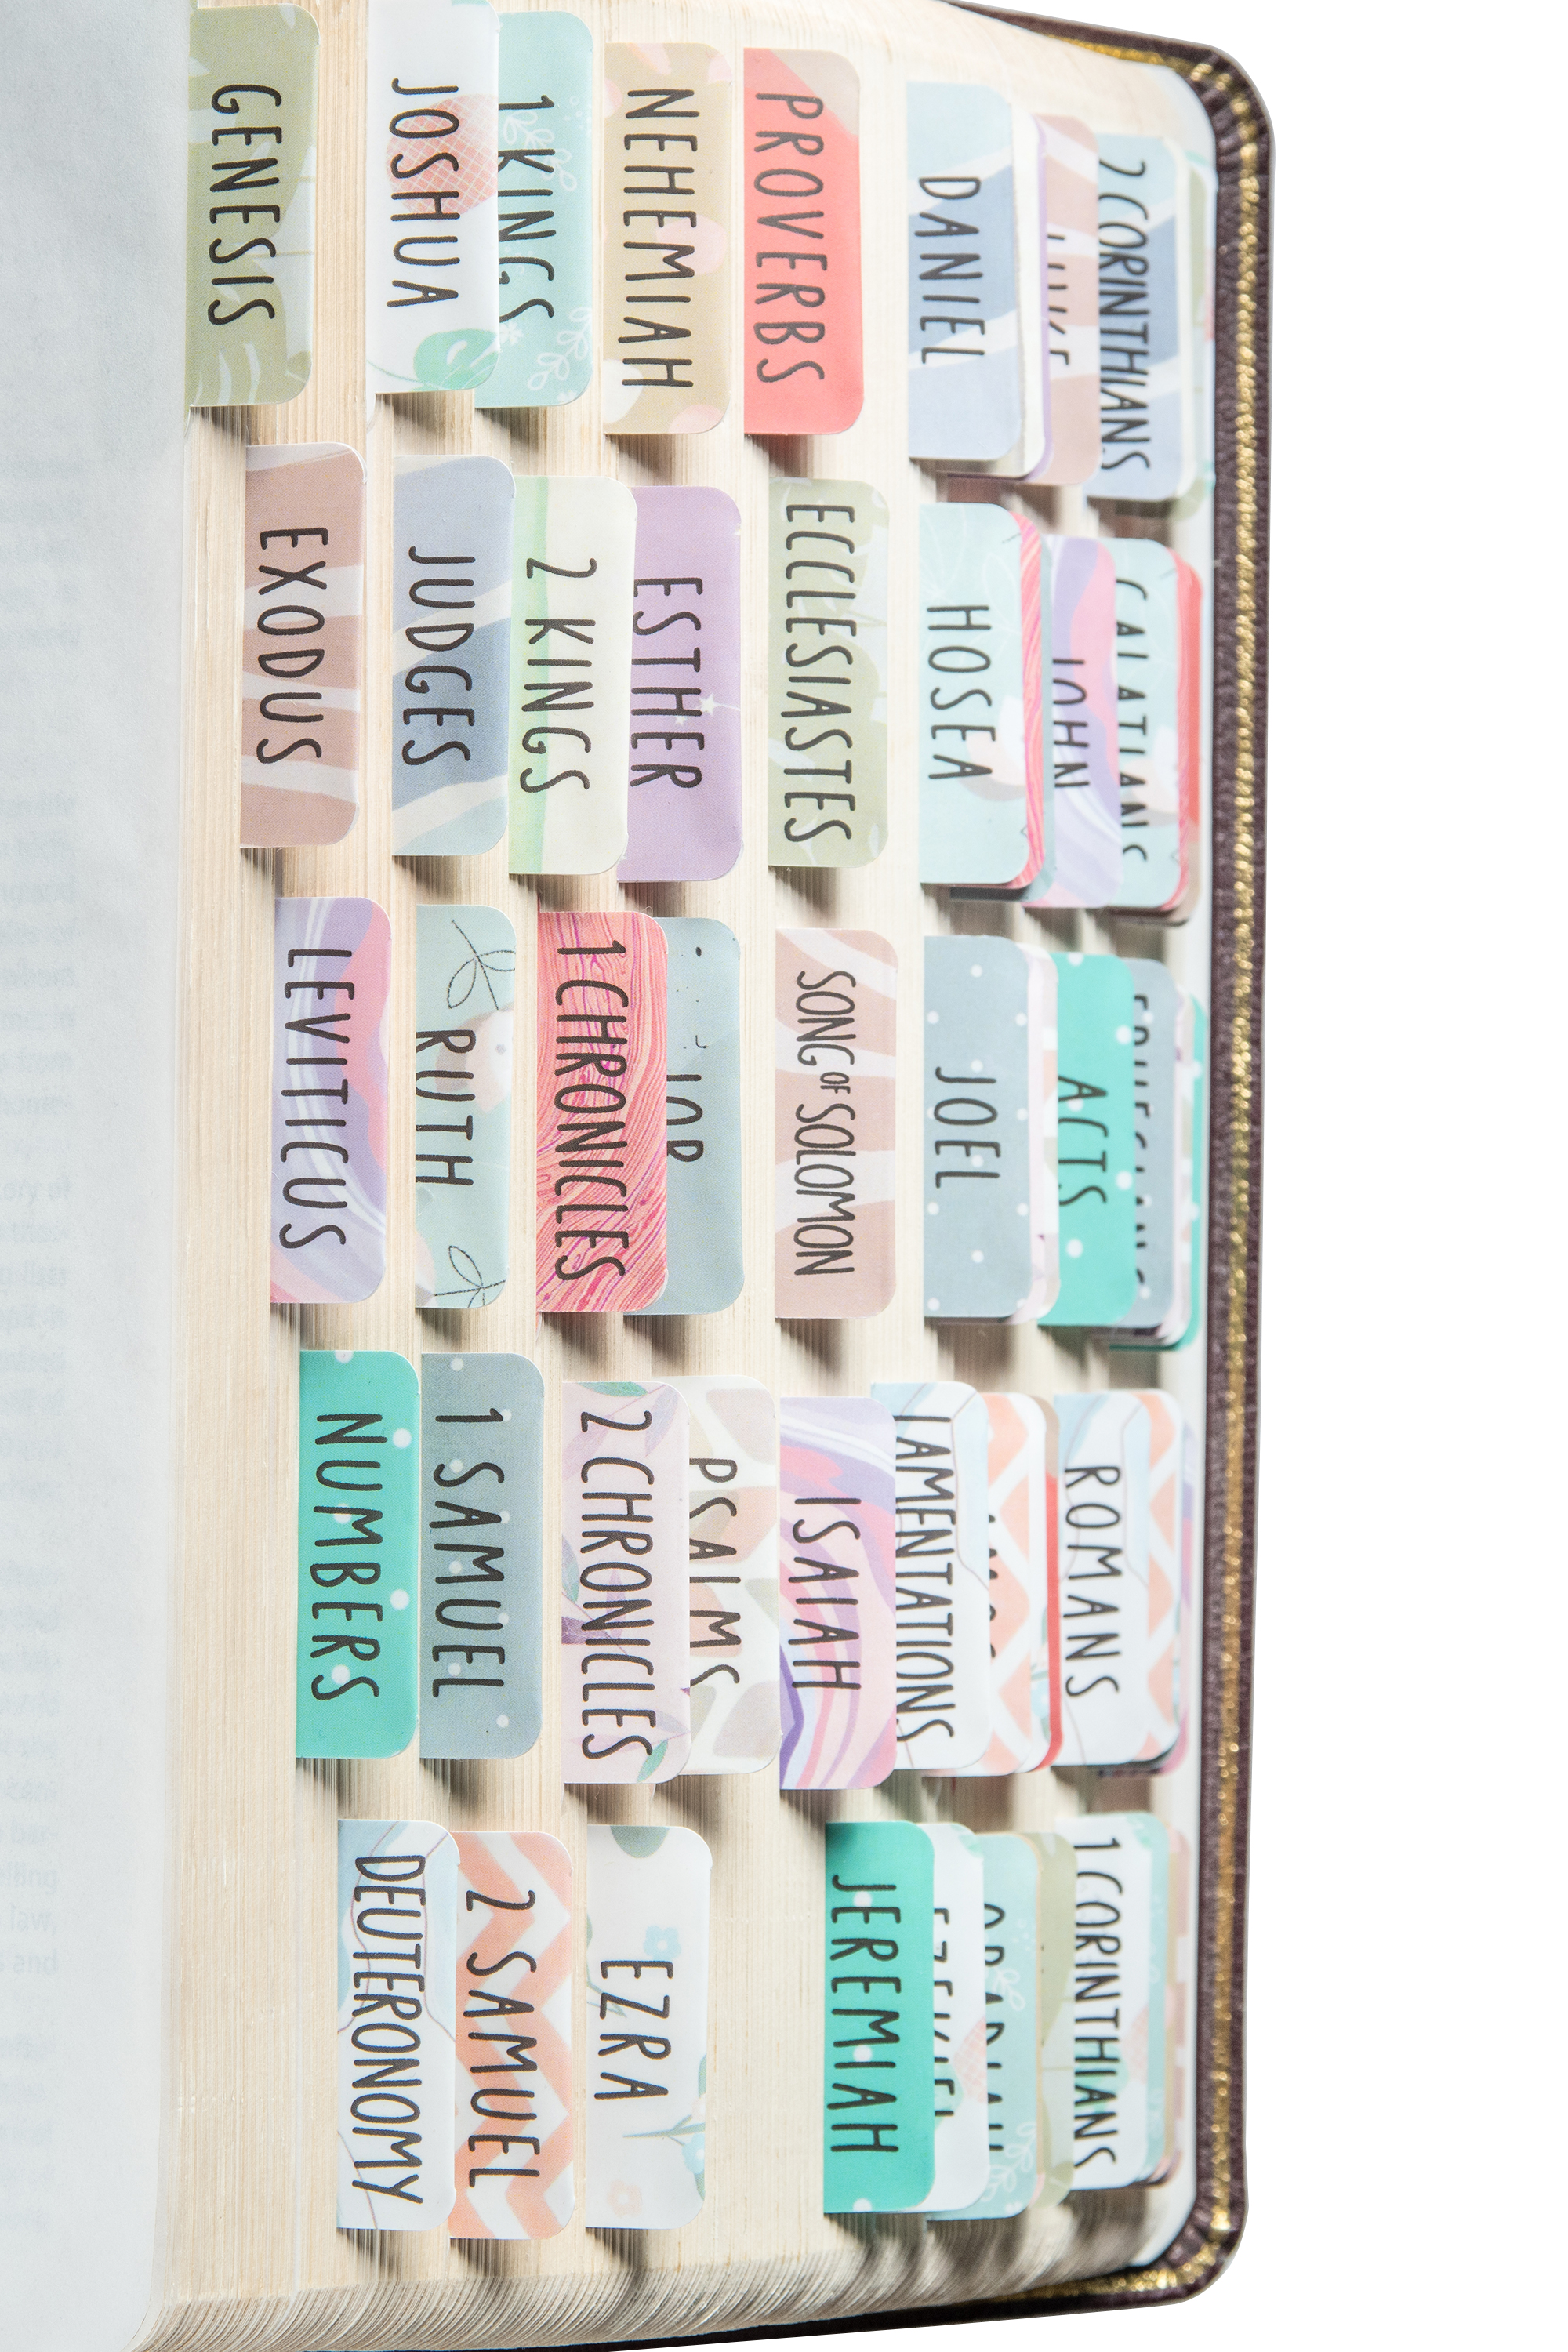 DiverseBee Laminated Bible Tabs (Large Print Easy to Read) Personalized Bible Journaling Tabs 66 Book Tabs and 14 Blank Tabs - Uniform Theme